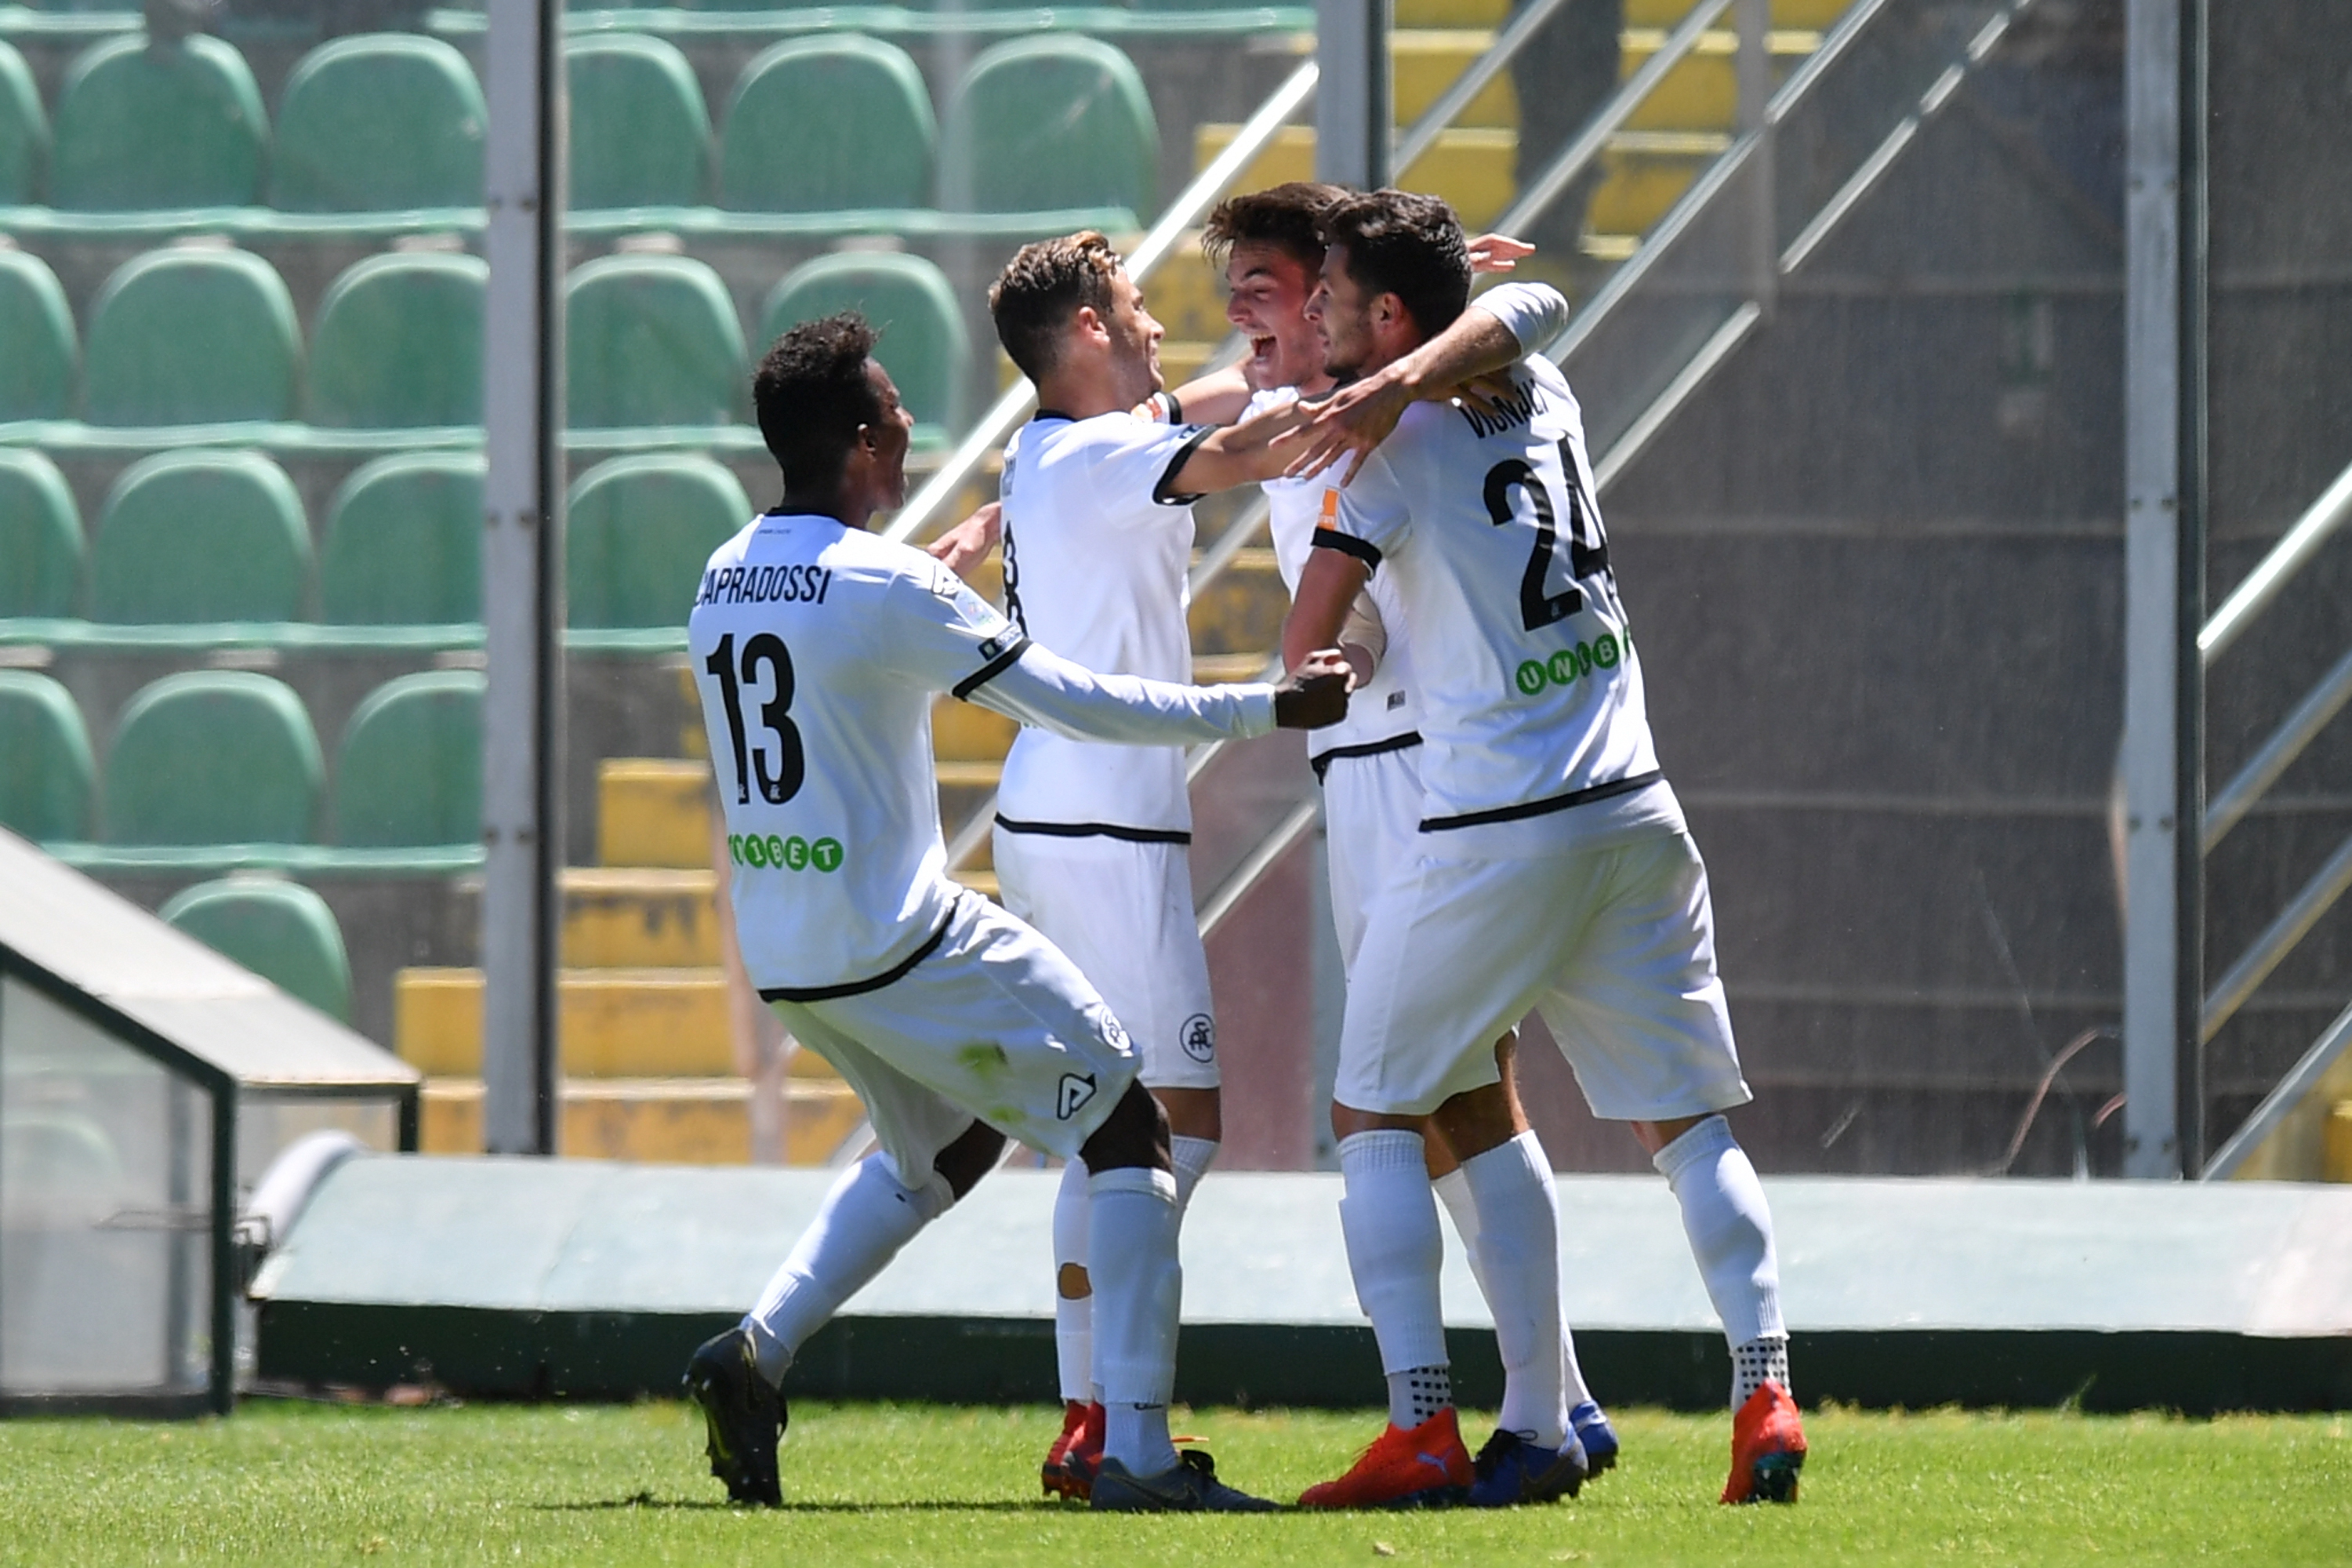 PALERMO, ITALY - MAY 01: Giulio Maggiore of Spezia celebrates with his team mates after scoring the opening goal during the Serie B match between US Citta di Palermo and AC Spezia at Stadio Renzo Barbera on May 01, 2019 in Palermo, Italy. (Photo by Tullio M. Puglia/Getty Images)